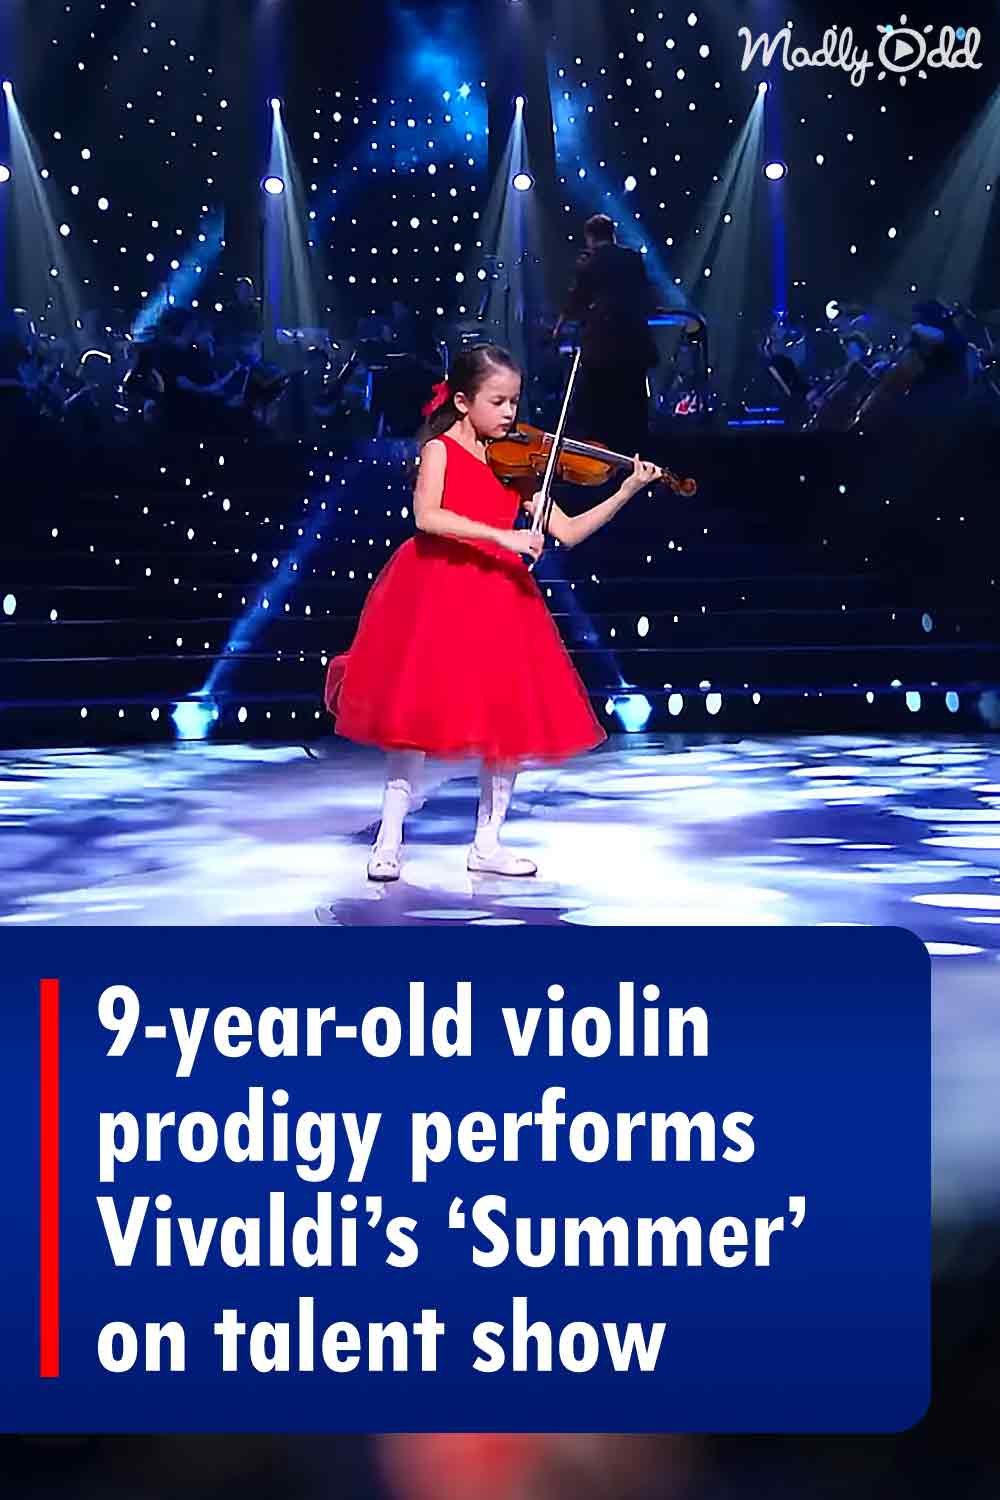 9-year-old violin prodigy performs Vivaldi’s ‘Summer’ on talent show